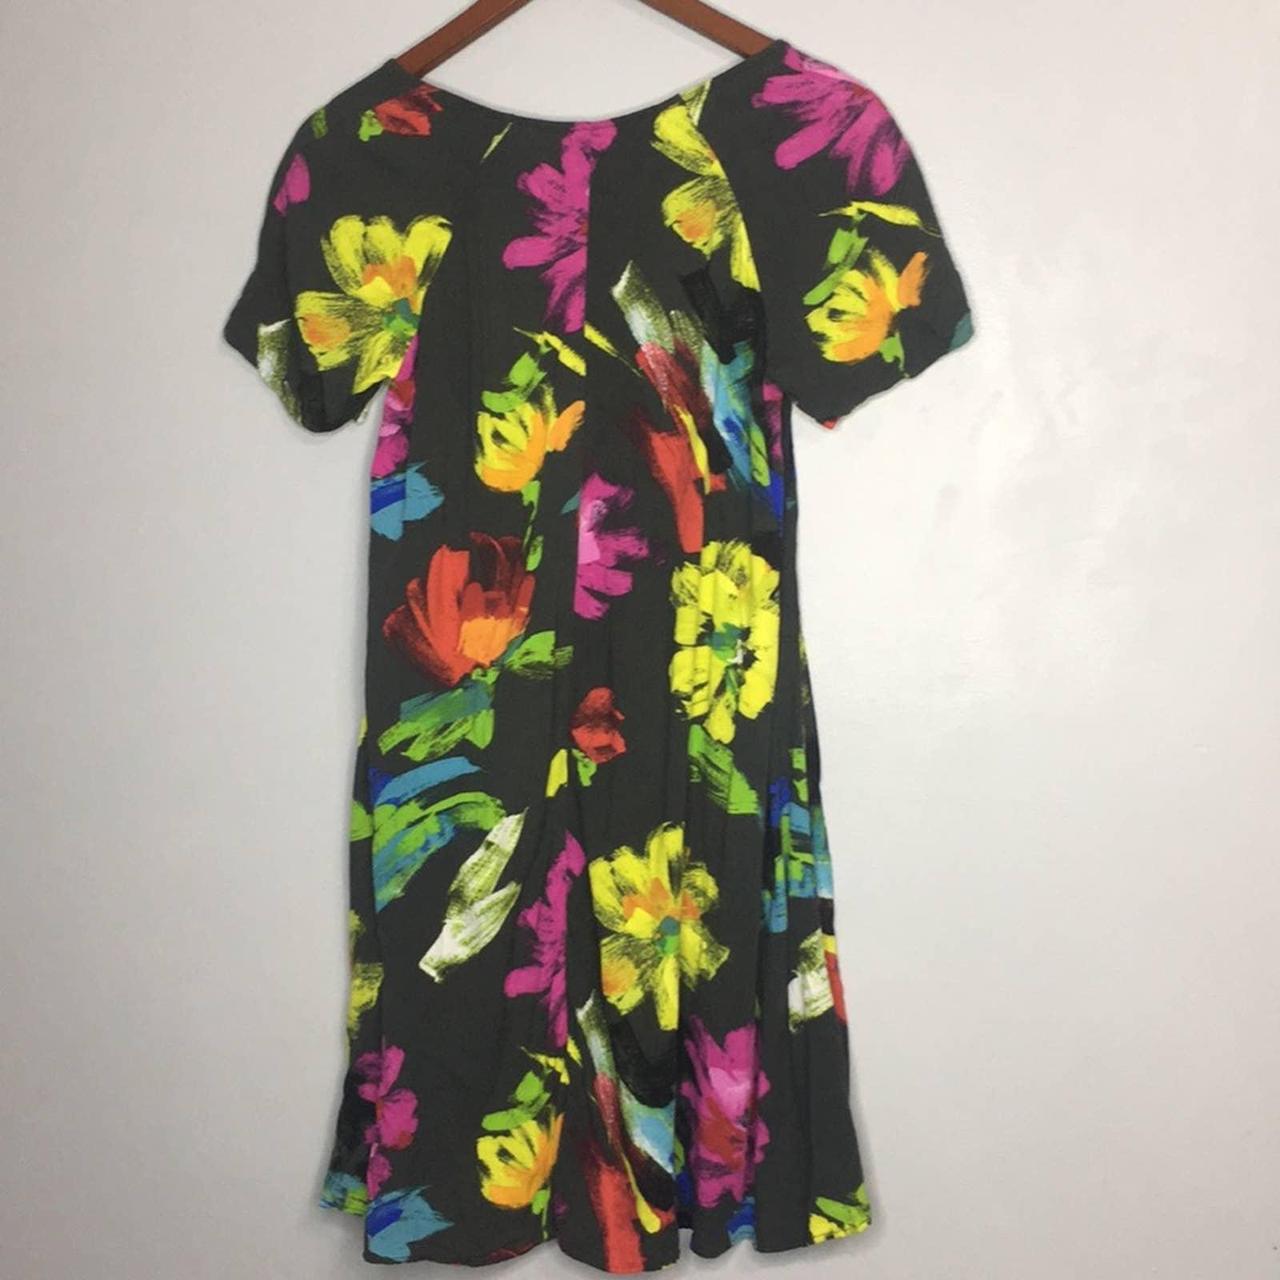 Product Image 4 - Jams World colorful floral dress